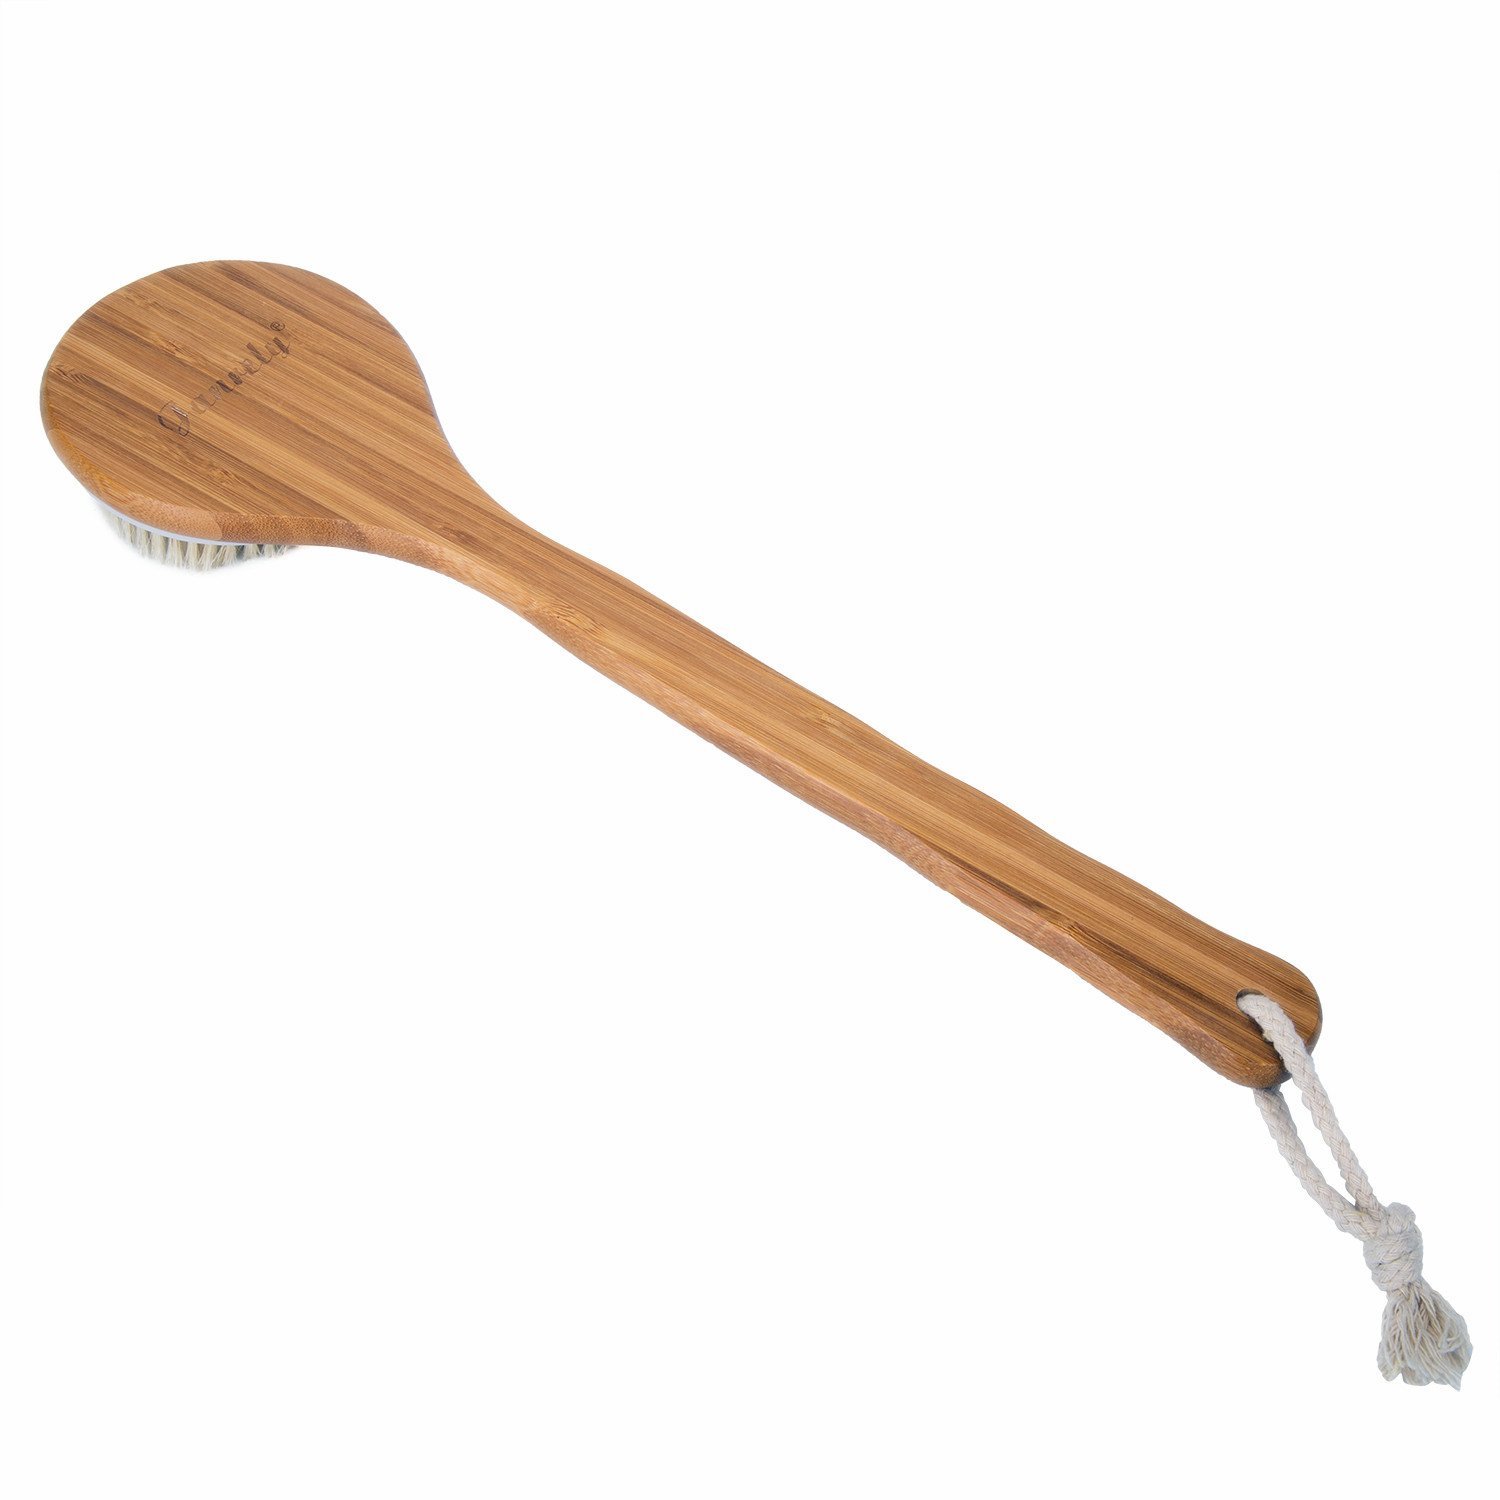 Janrely Bath Dry Body Brush Natural Bristles Back Scrubber With Long Wooden Handle For Cellulite And Exfoliating